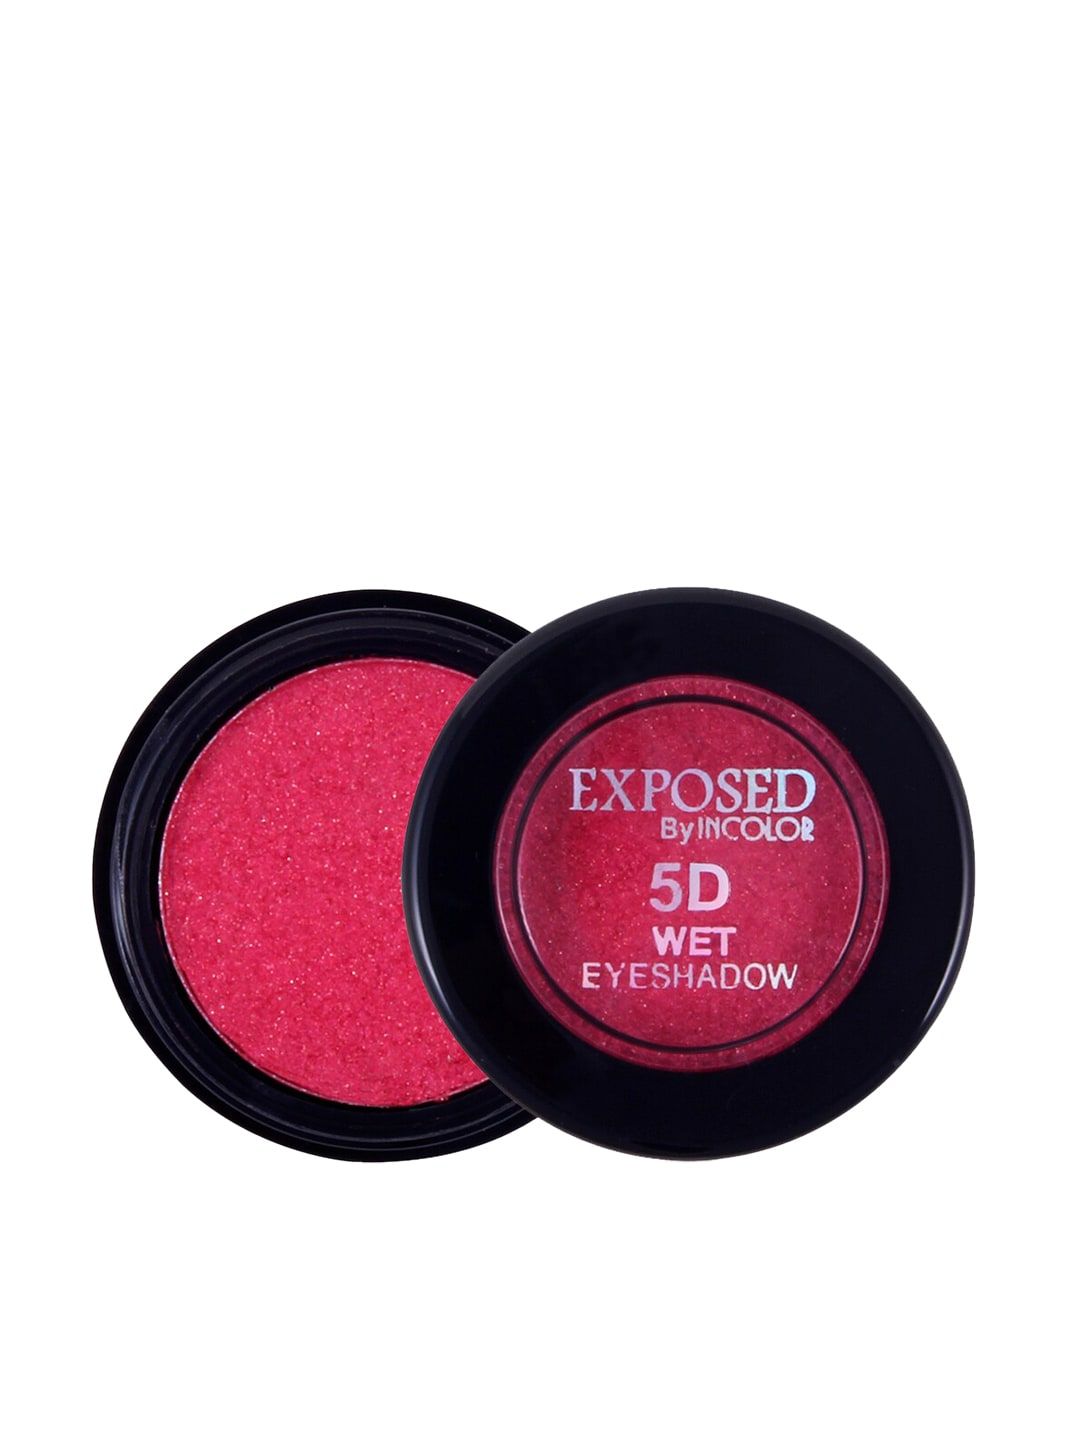 INCOLOR Pink 5D 6 Wet Eyeshadow 4.5g Price in India